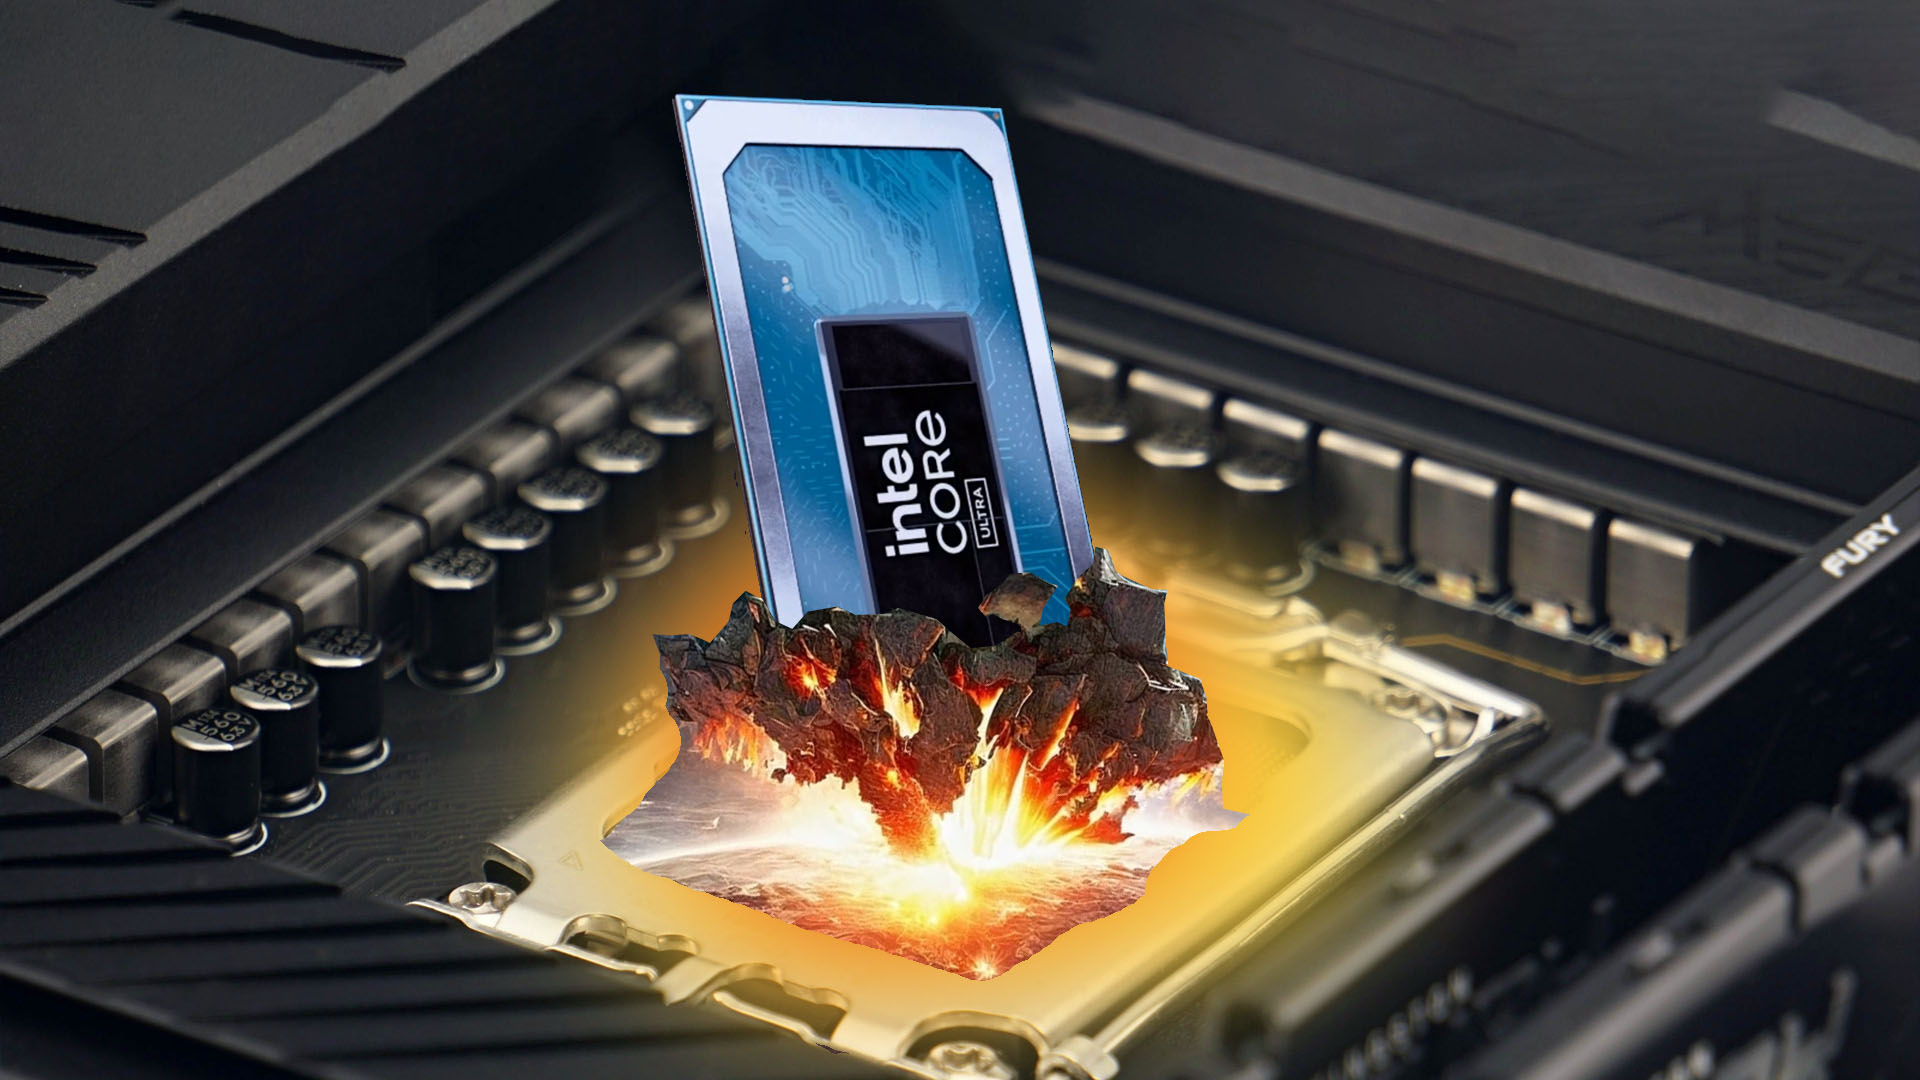 Intel Meteor Lake finally gets a desktop CPU launch, but with a catch